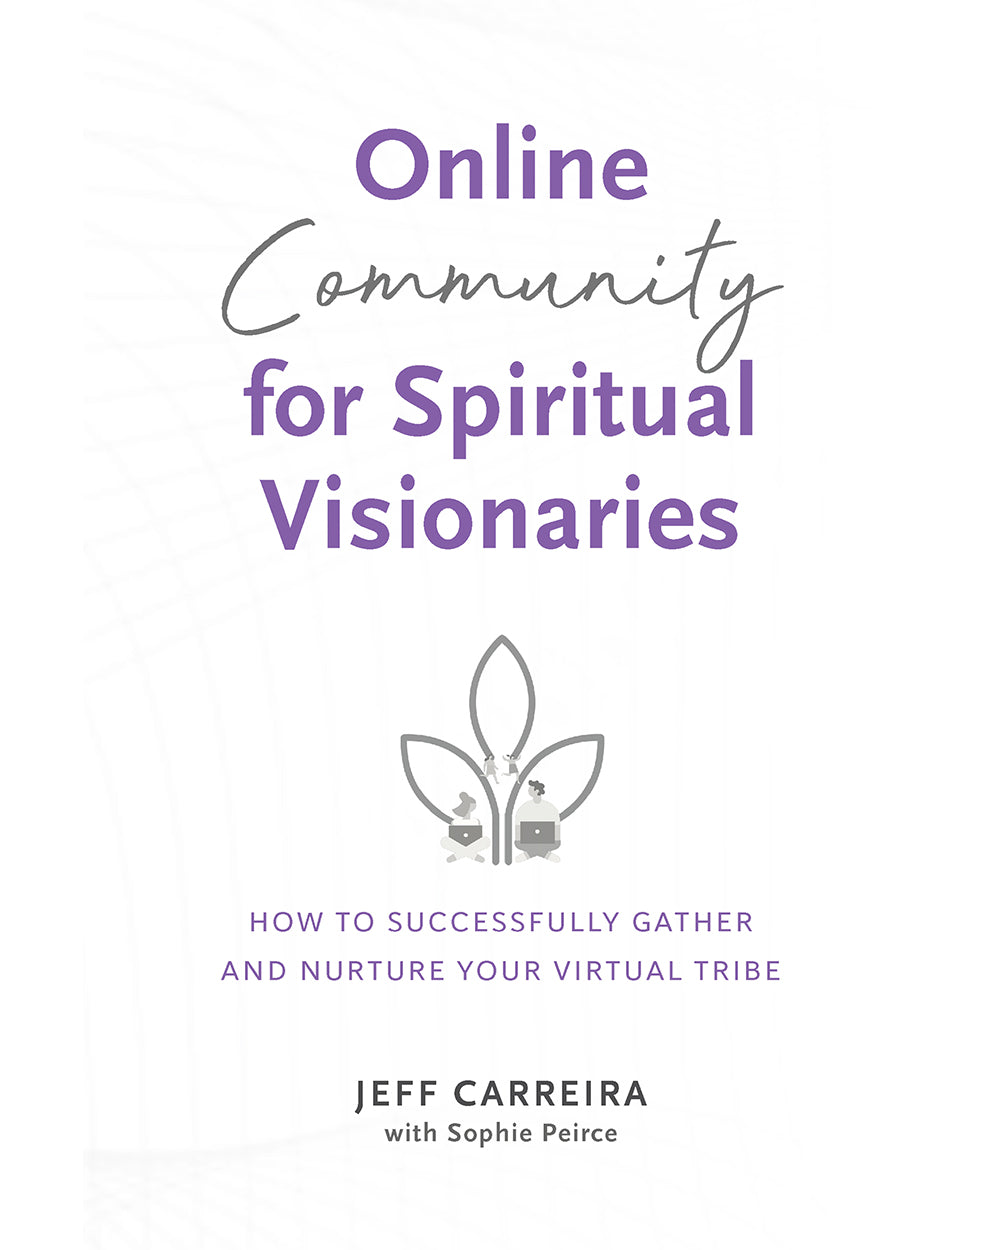 Online Community for Spiritual Visionaries: How to Successfully Gather and Nurture Your Virtual Tribe